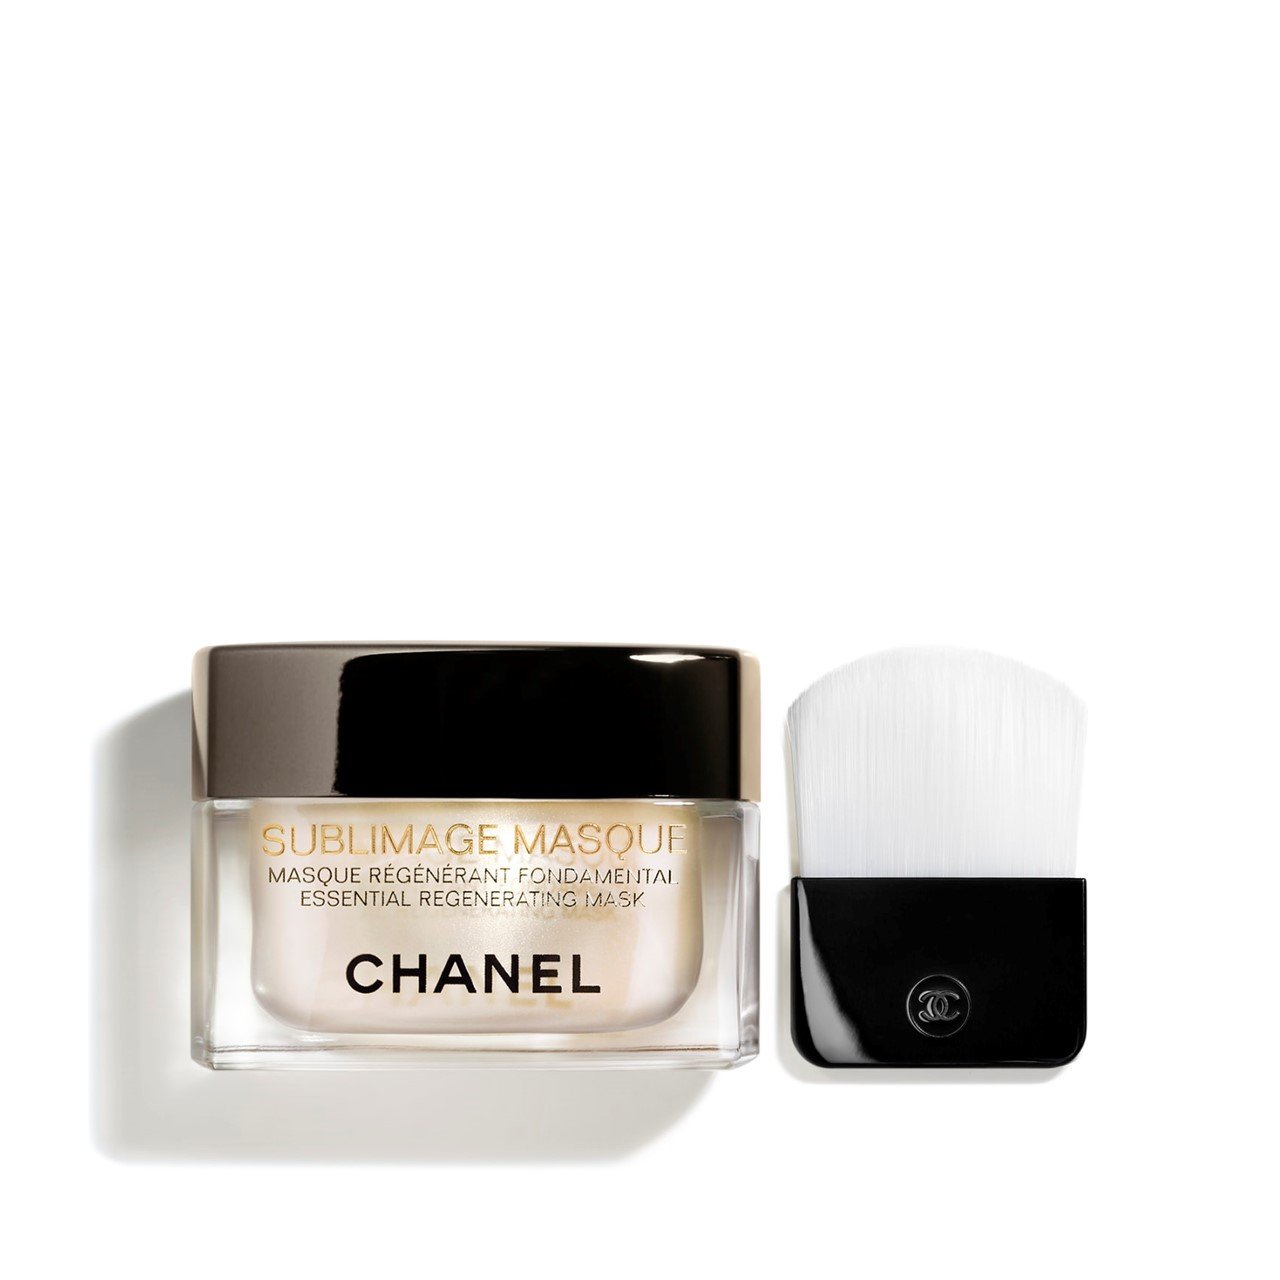 Sublimage Essential Regenerating Mask for Sale  Chanel Skincare Buy Now   Author